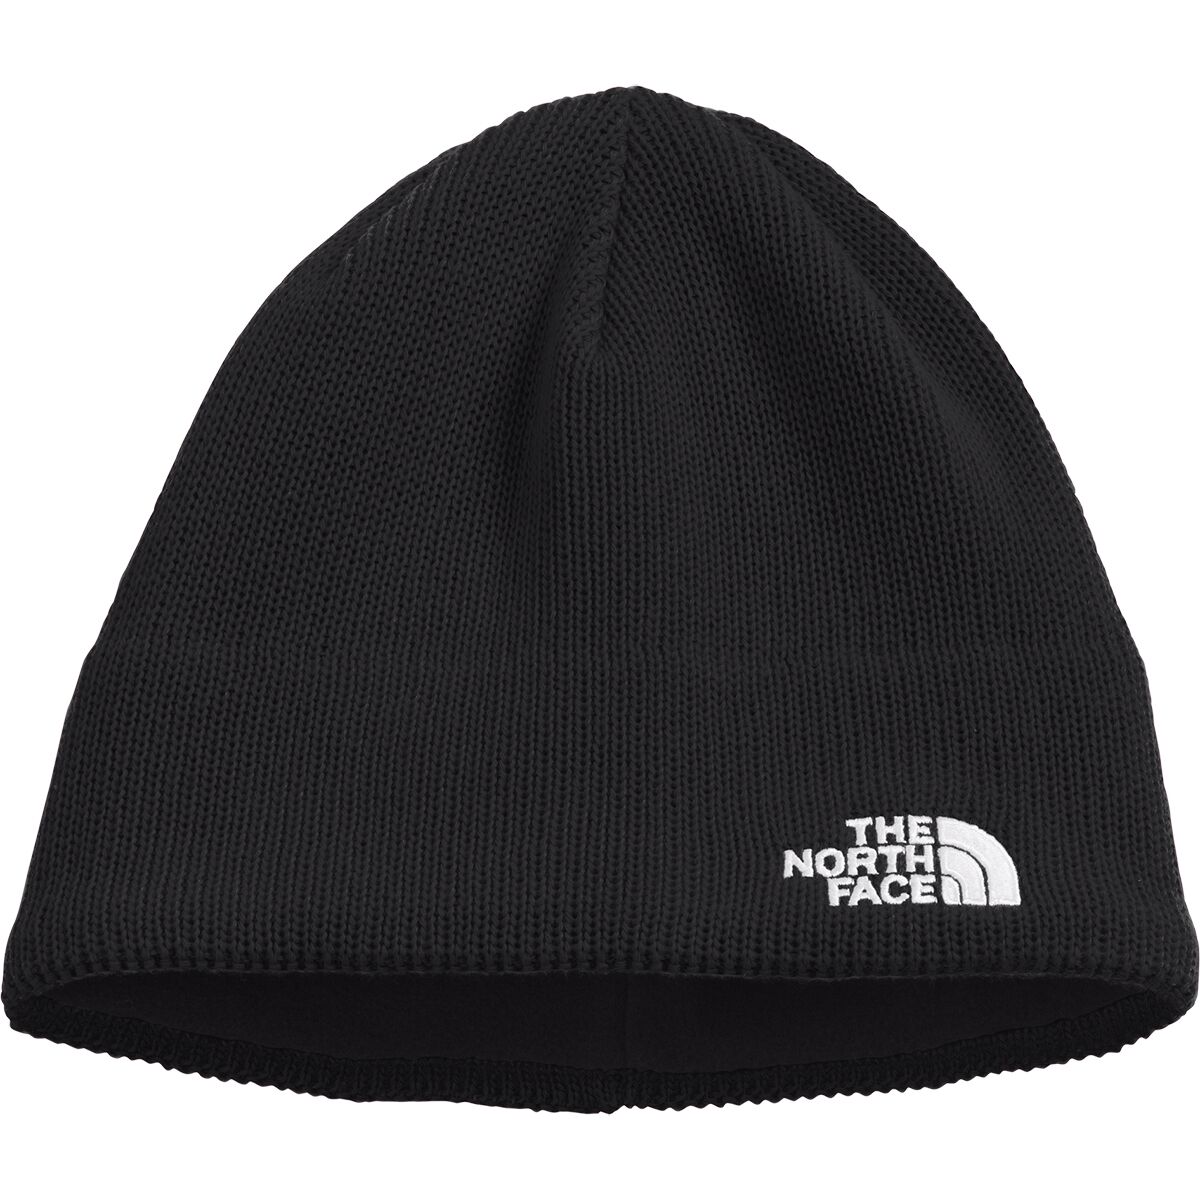 The North Face Bones Recycled Beanie - Kids'